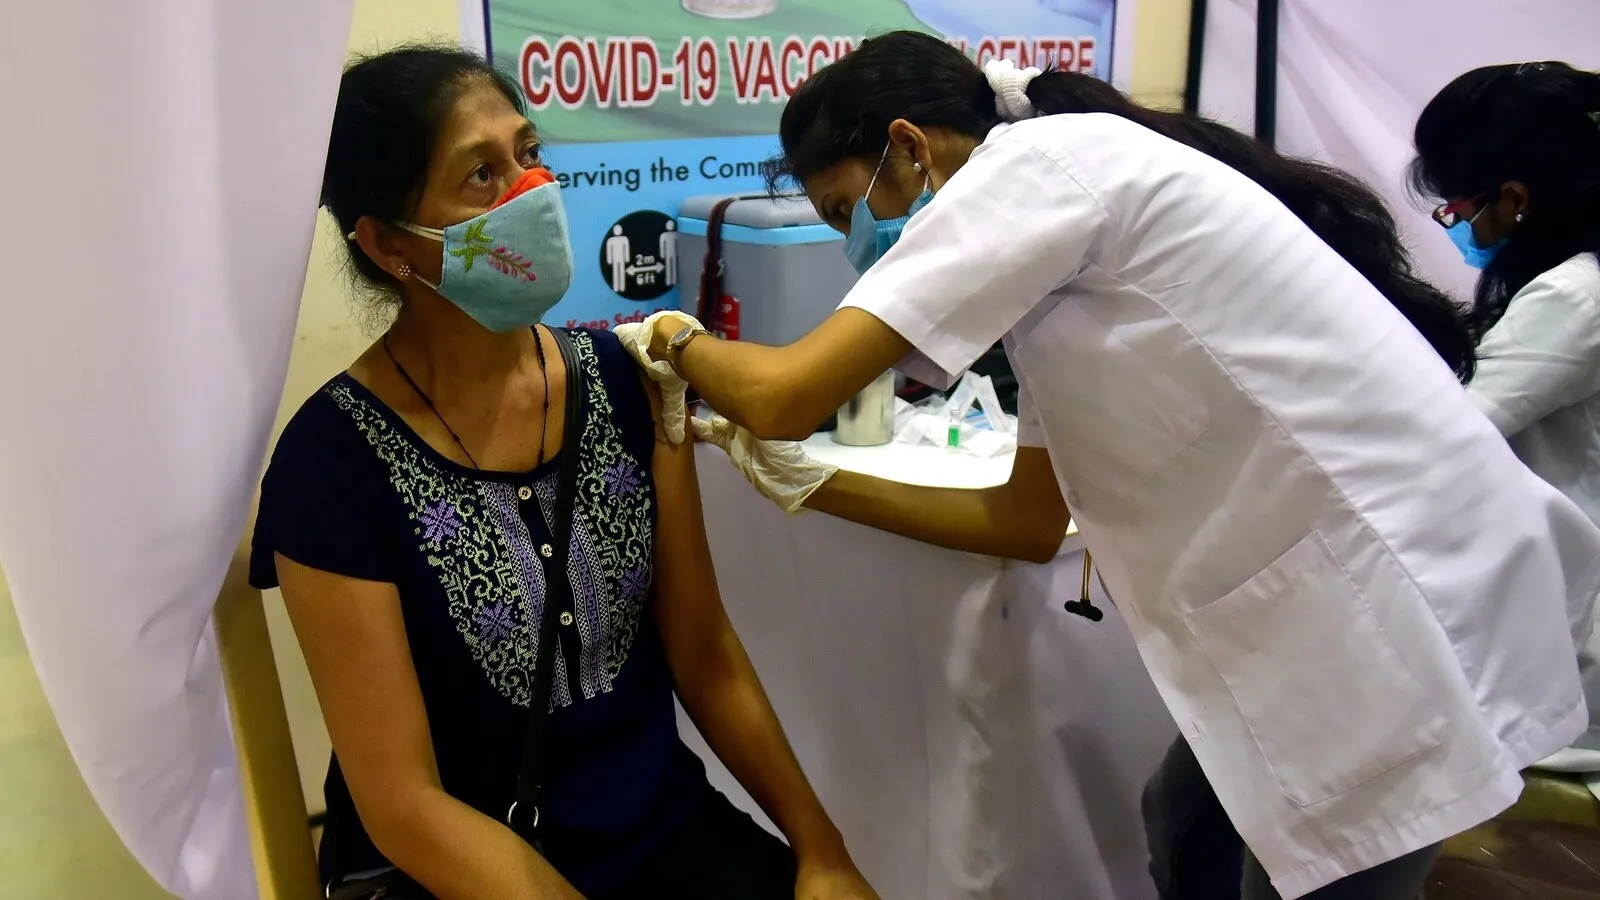 Covid vaccination certificate now available through WhatsApp. Details here  | Latest News India - Hindustan Times